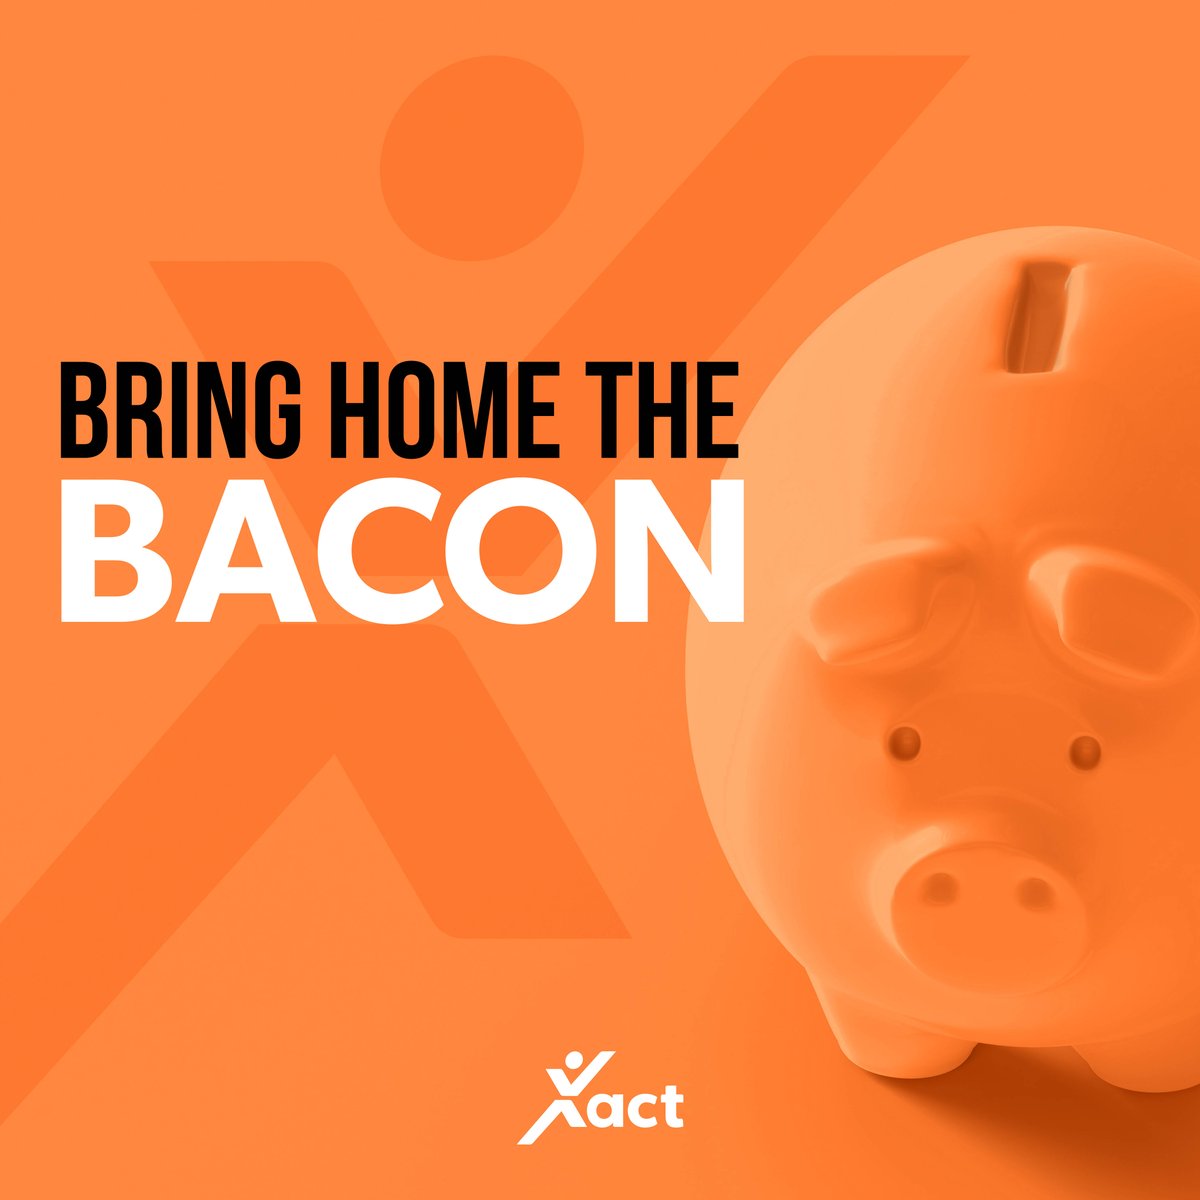 Is your data sitting idle or is it working hard to bring home the bacon? Don’t let your valuable data go to waste. Transform it into value-added services or share it with trustworthy organizations to unlock its full potential.